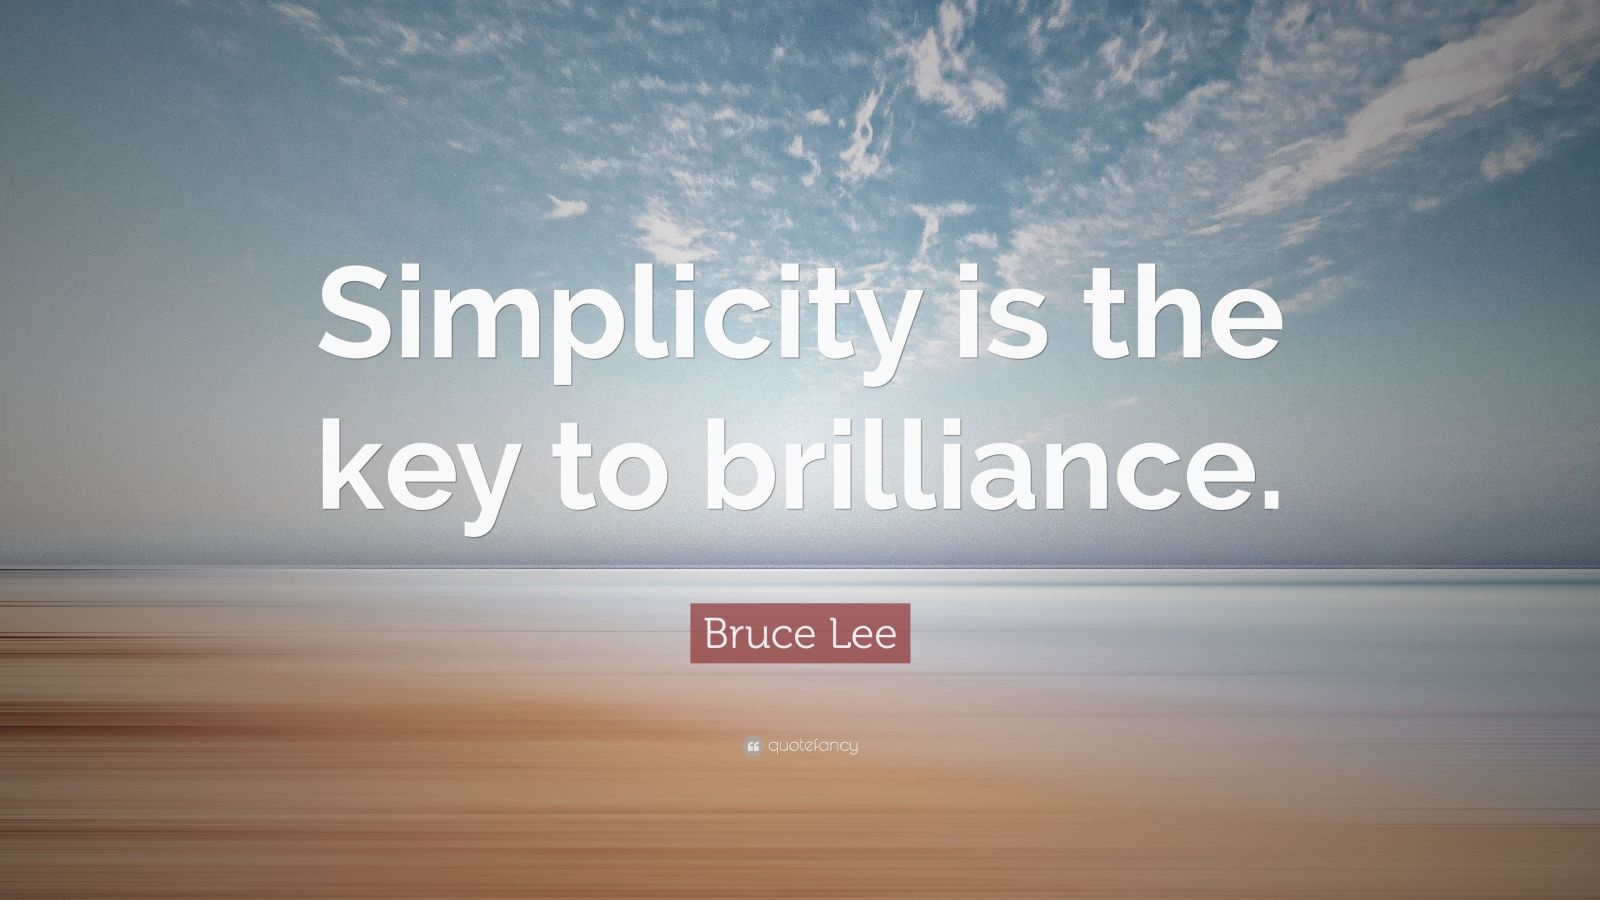 Bruce Lee Quote: “Simplicity is the key to brilliance.” 12